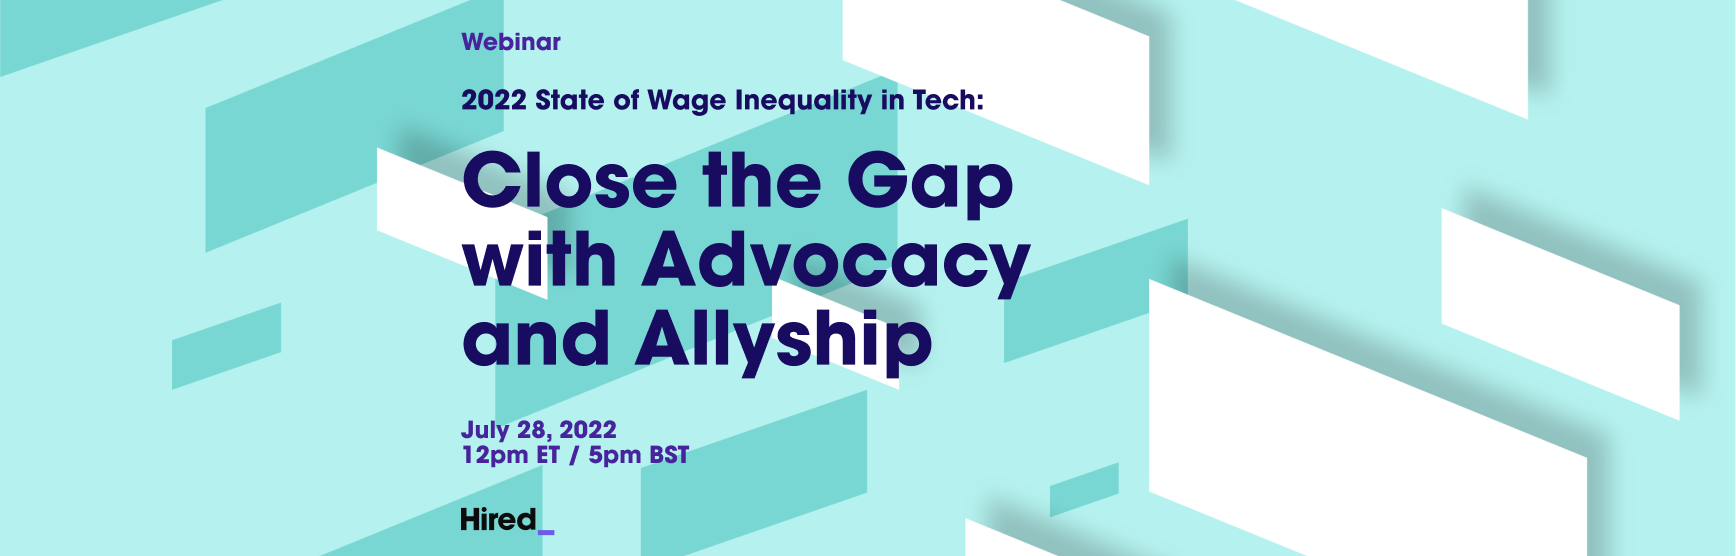 Candidate webinar event - Close the Gap with Advocacy and Allyship Wage Inequality Pay Equity